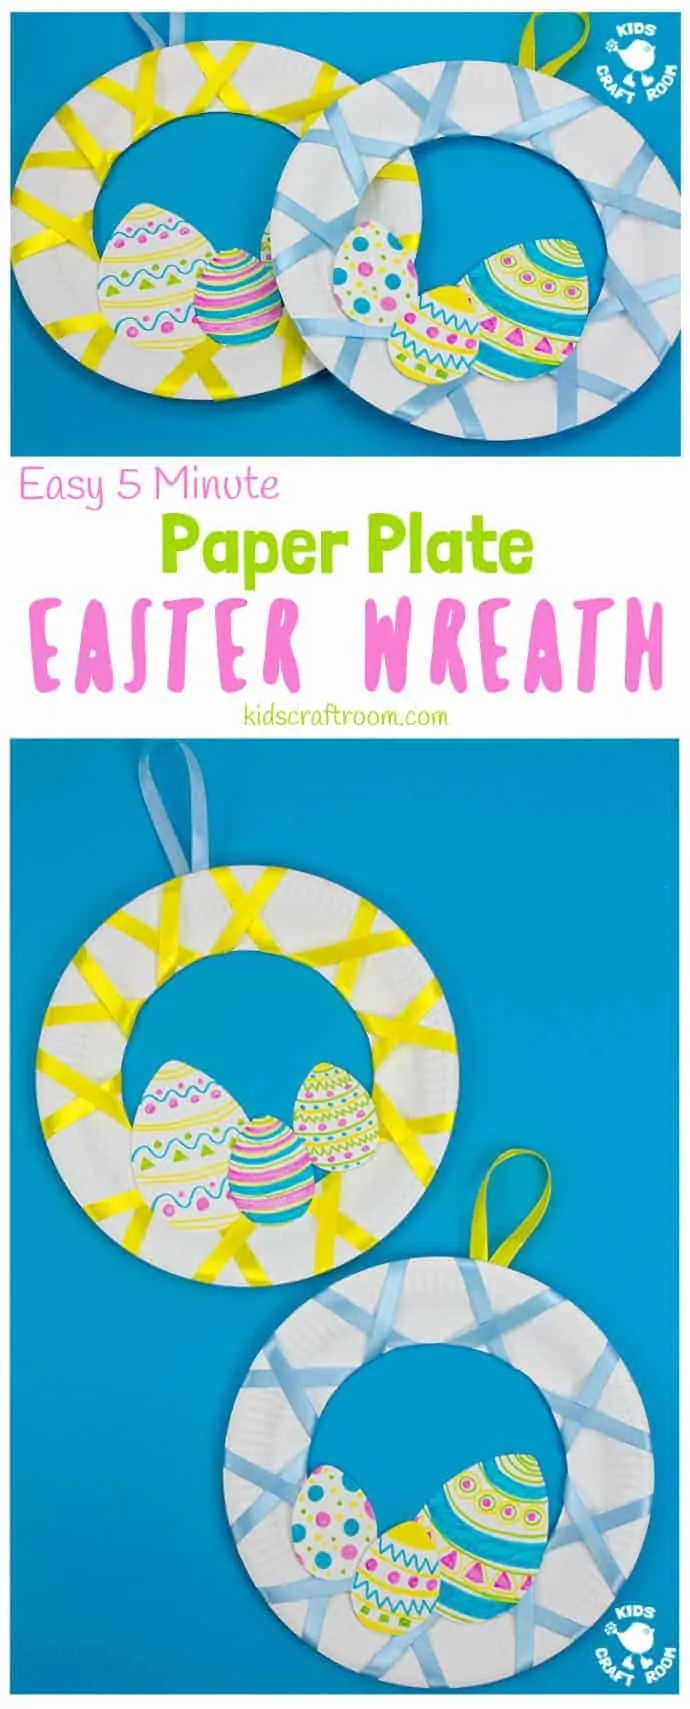 Looking for an easy 5 minute Easter craft for kids? This Easy Peasy Paper Plate Easter Wreath craft is super quick and virtually mess free! These pretty paper plate wreaths are such a fun Spring craft for kids. #kidscraftroom #eastercrafts #eastercraftsforkids #wreaths #wreathmaking #paperplatecrafts #easter #springcrafts